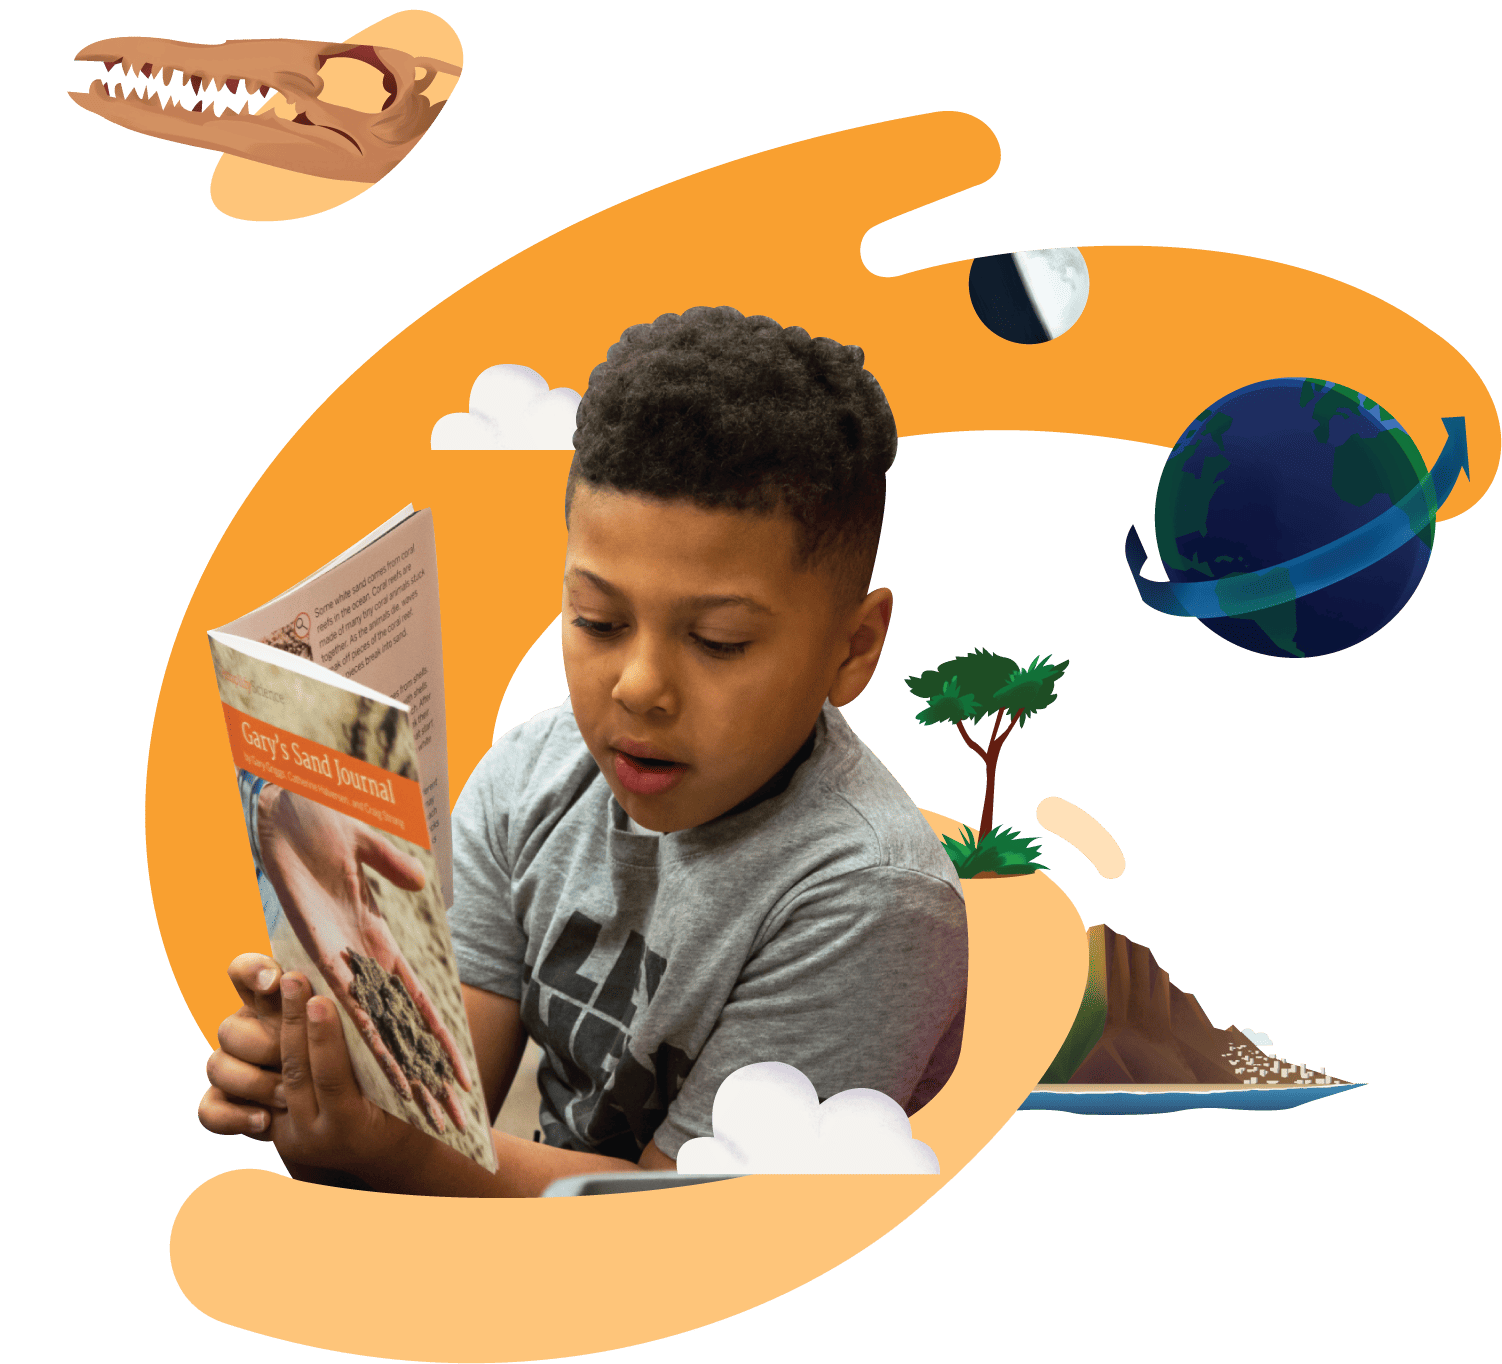 A young boy reads a book intently, surrounded by illustrated elements like a dinosaur head, globe, and trees on an abstract orange background.